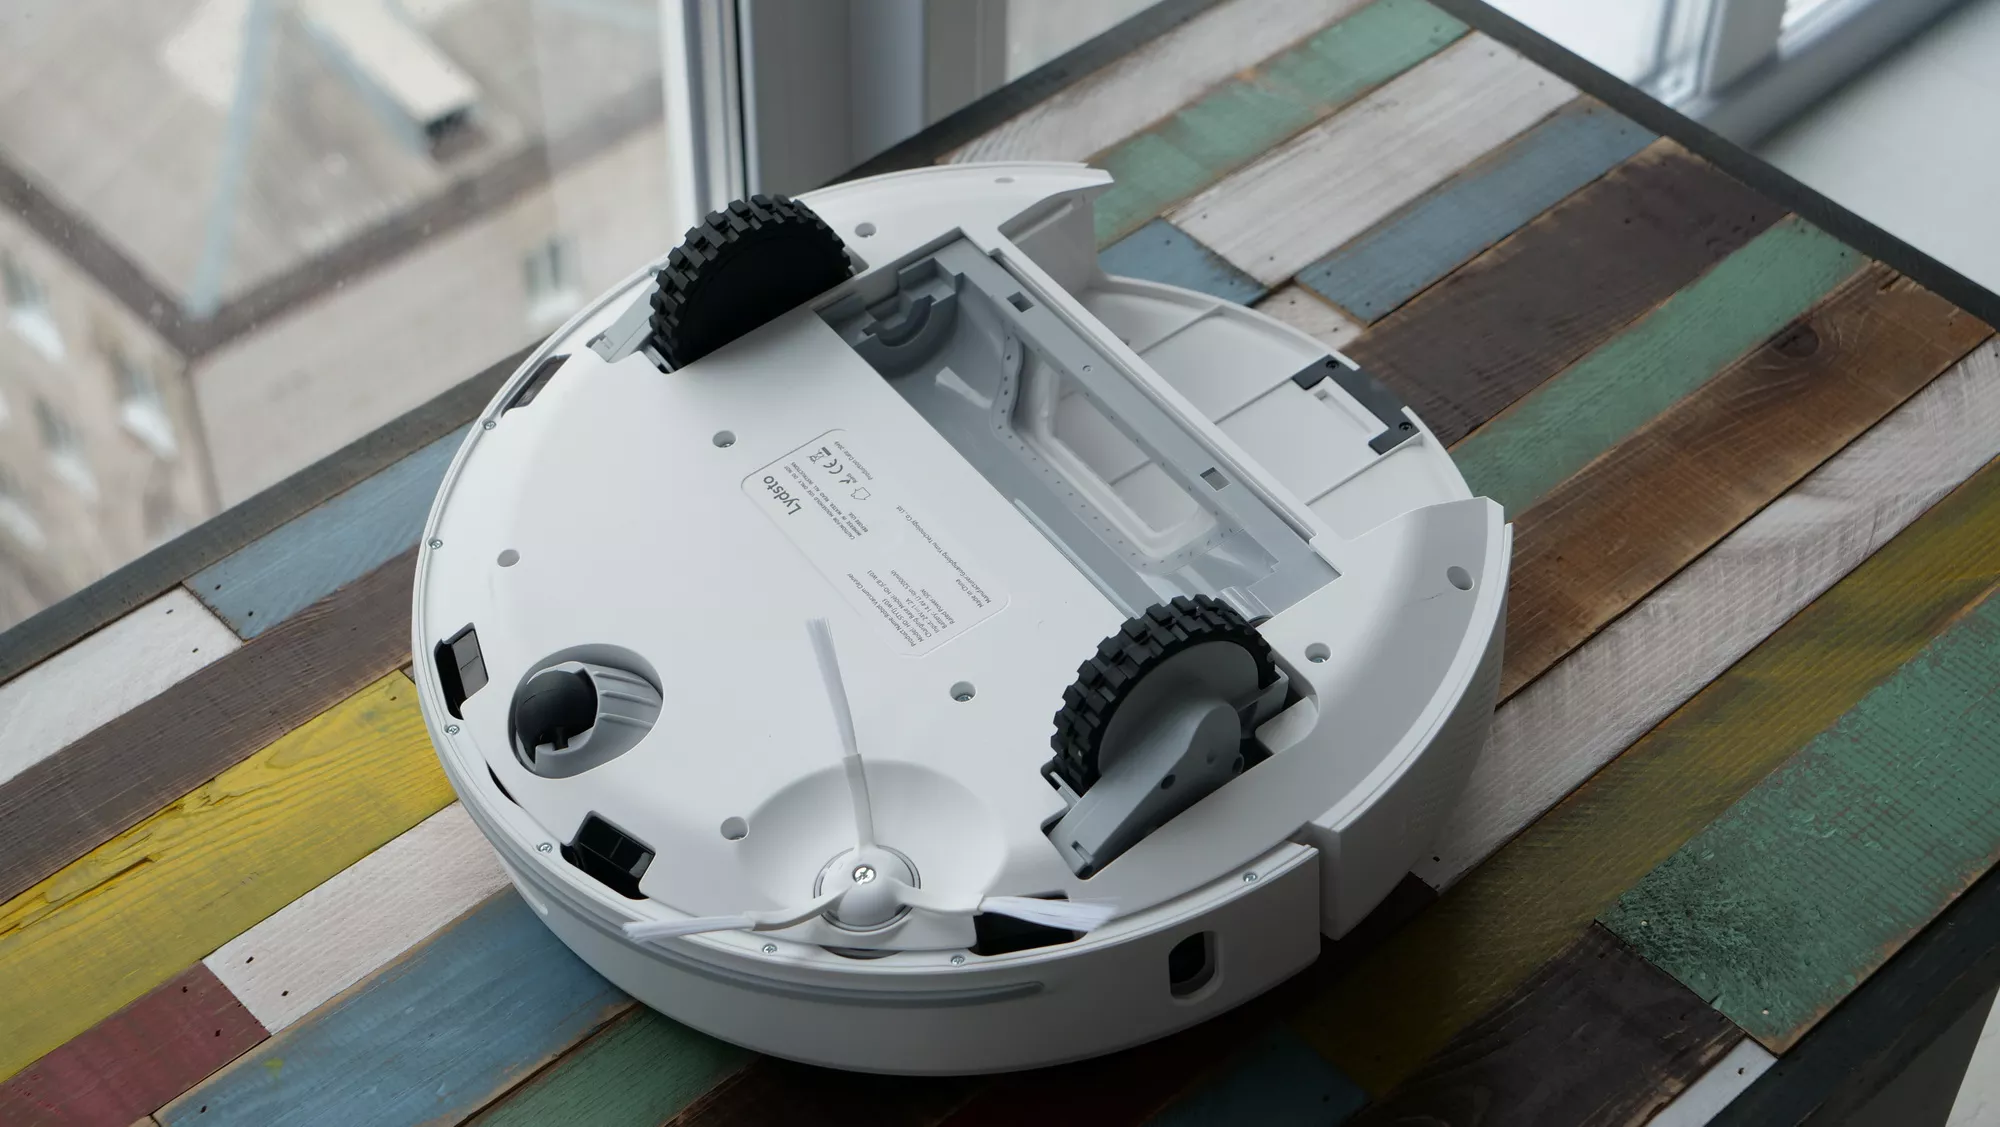 Xiaomi lydsto robot vacuum cleaner. Lydsto r1 робот-пылесос. Робот-пылесос Xiaomi lydsto. Xiaomi lydsto r1. Lydsto r1 Robot Vacuum Cleaner.